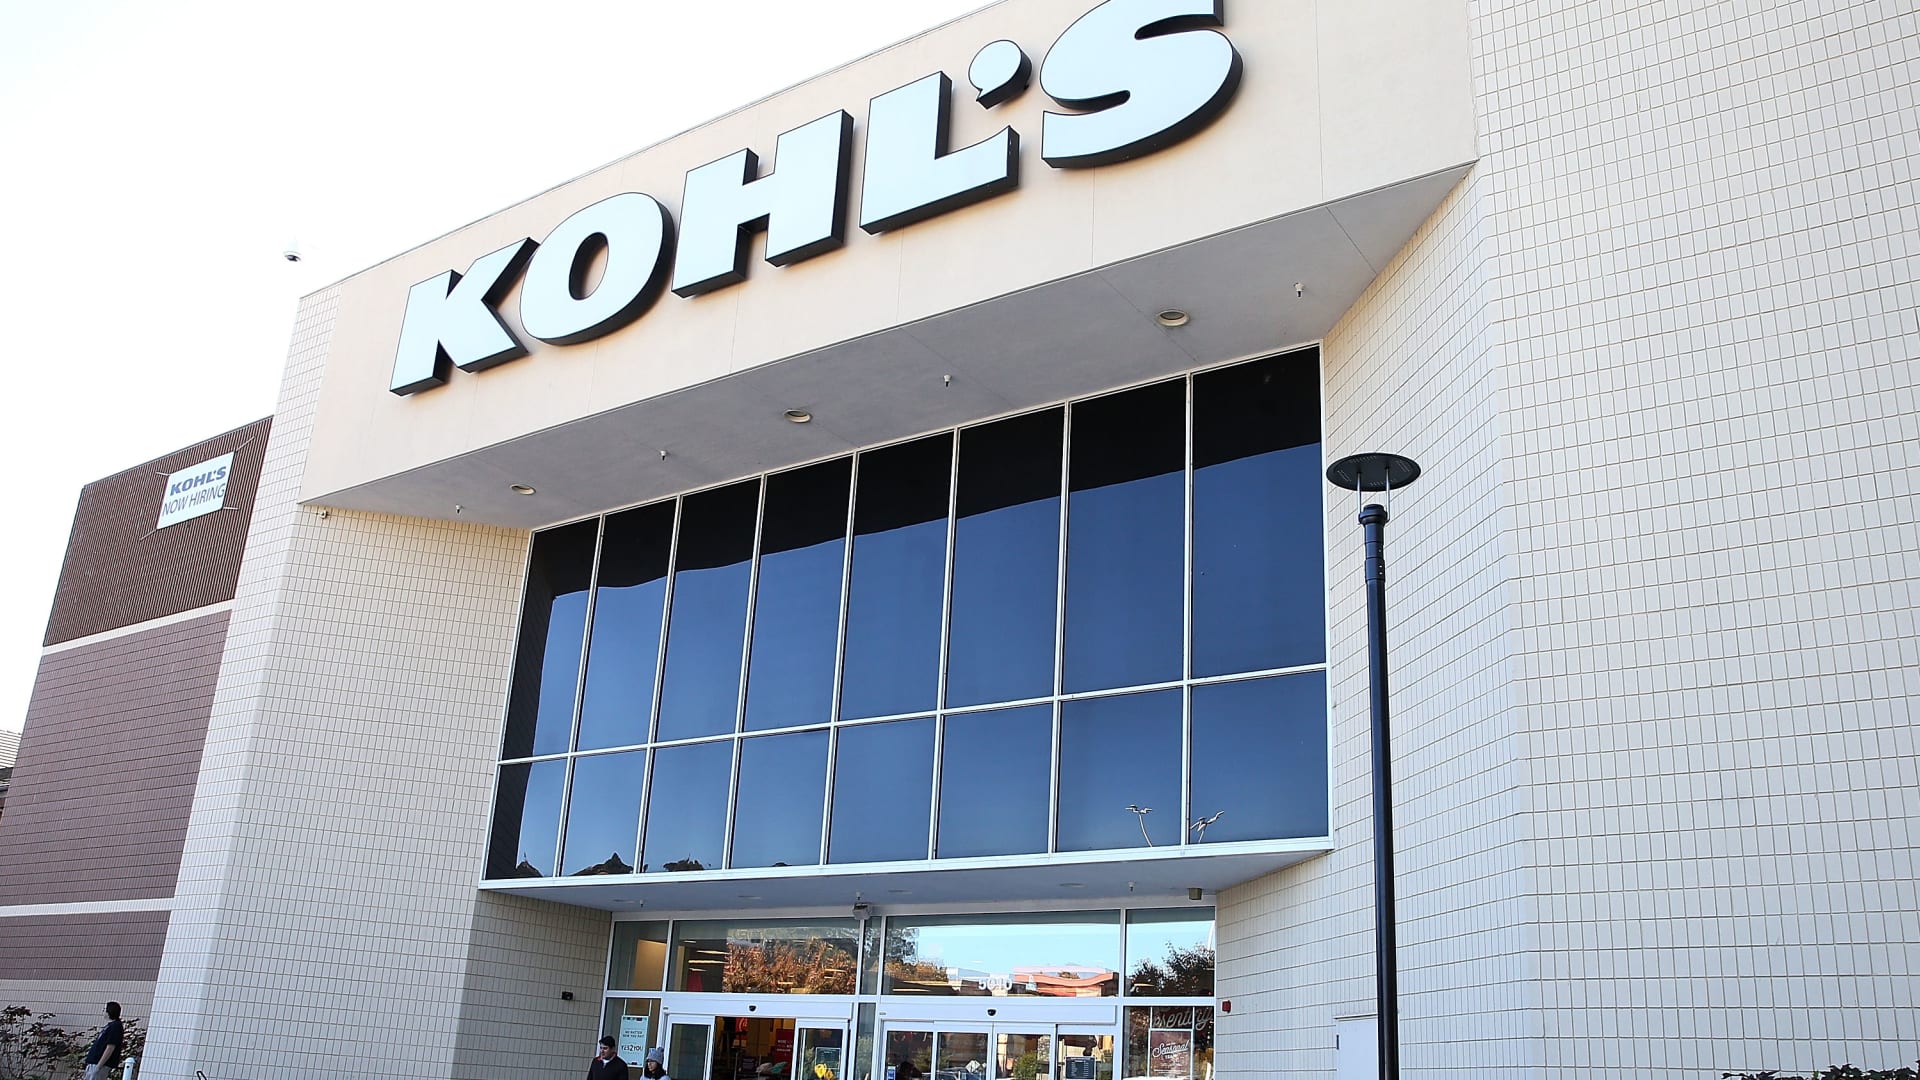 Kohl's says final sale bids expected in coming weeks; retailer slashes full-year outlook after earnings miss